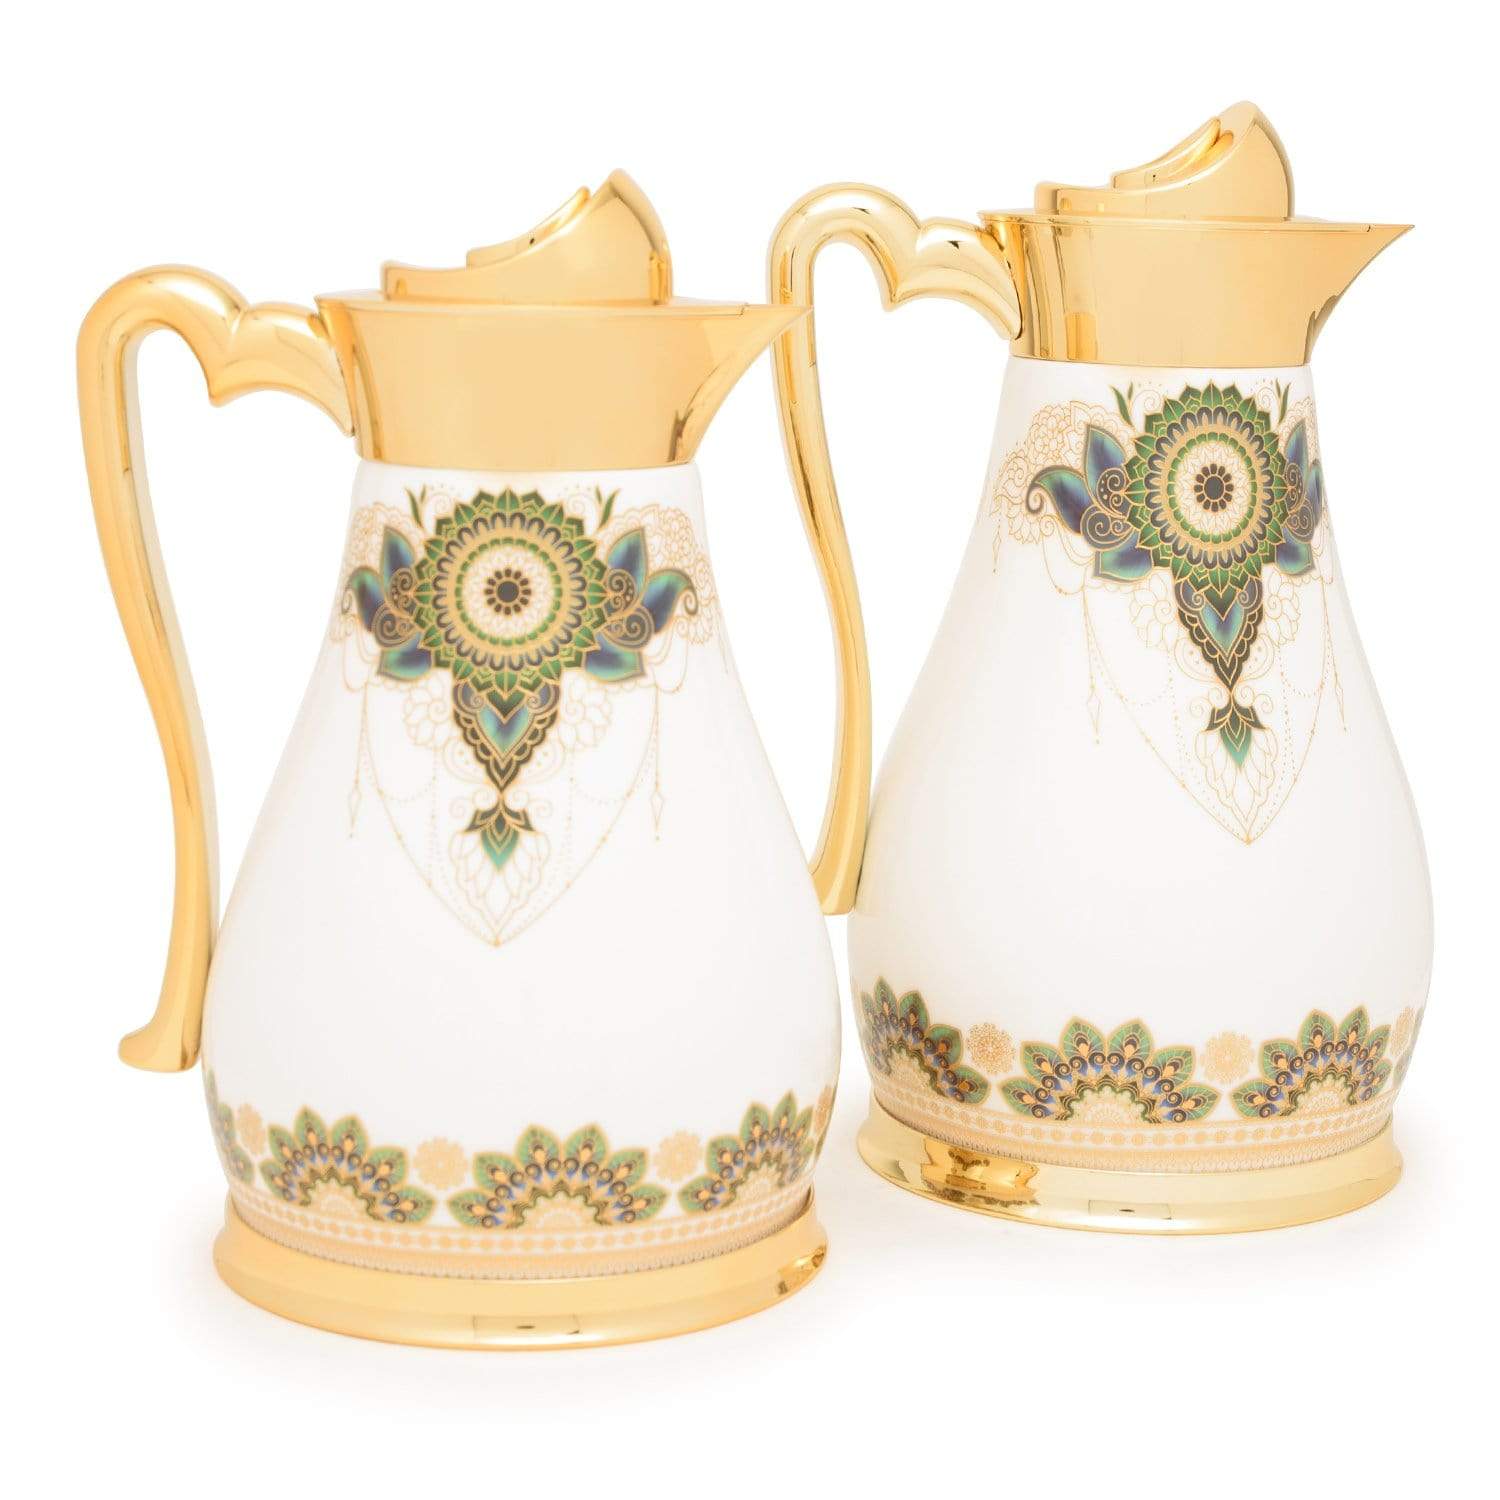 Am Rhianon Gold with Decorated Flask Tea Set - 22 Pieces - AM9415-S21/036 - Jashanmal Home